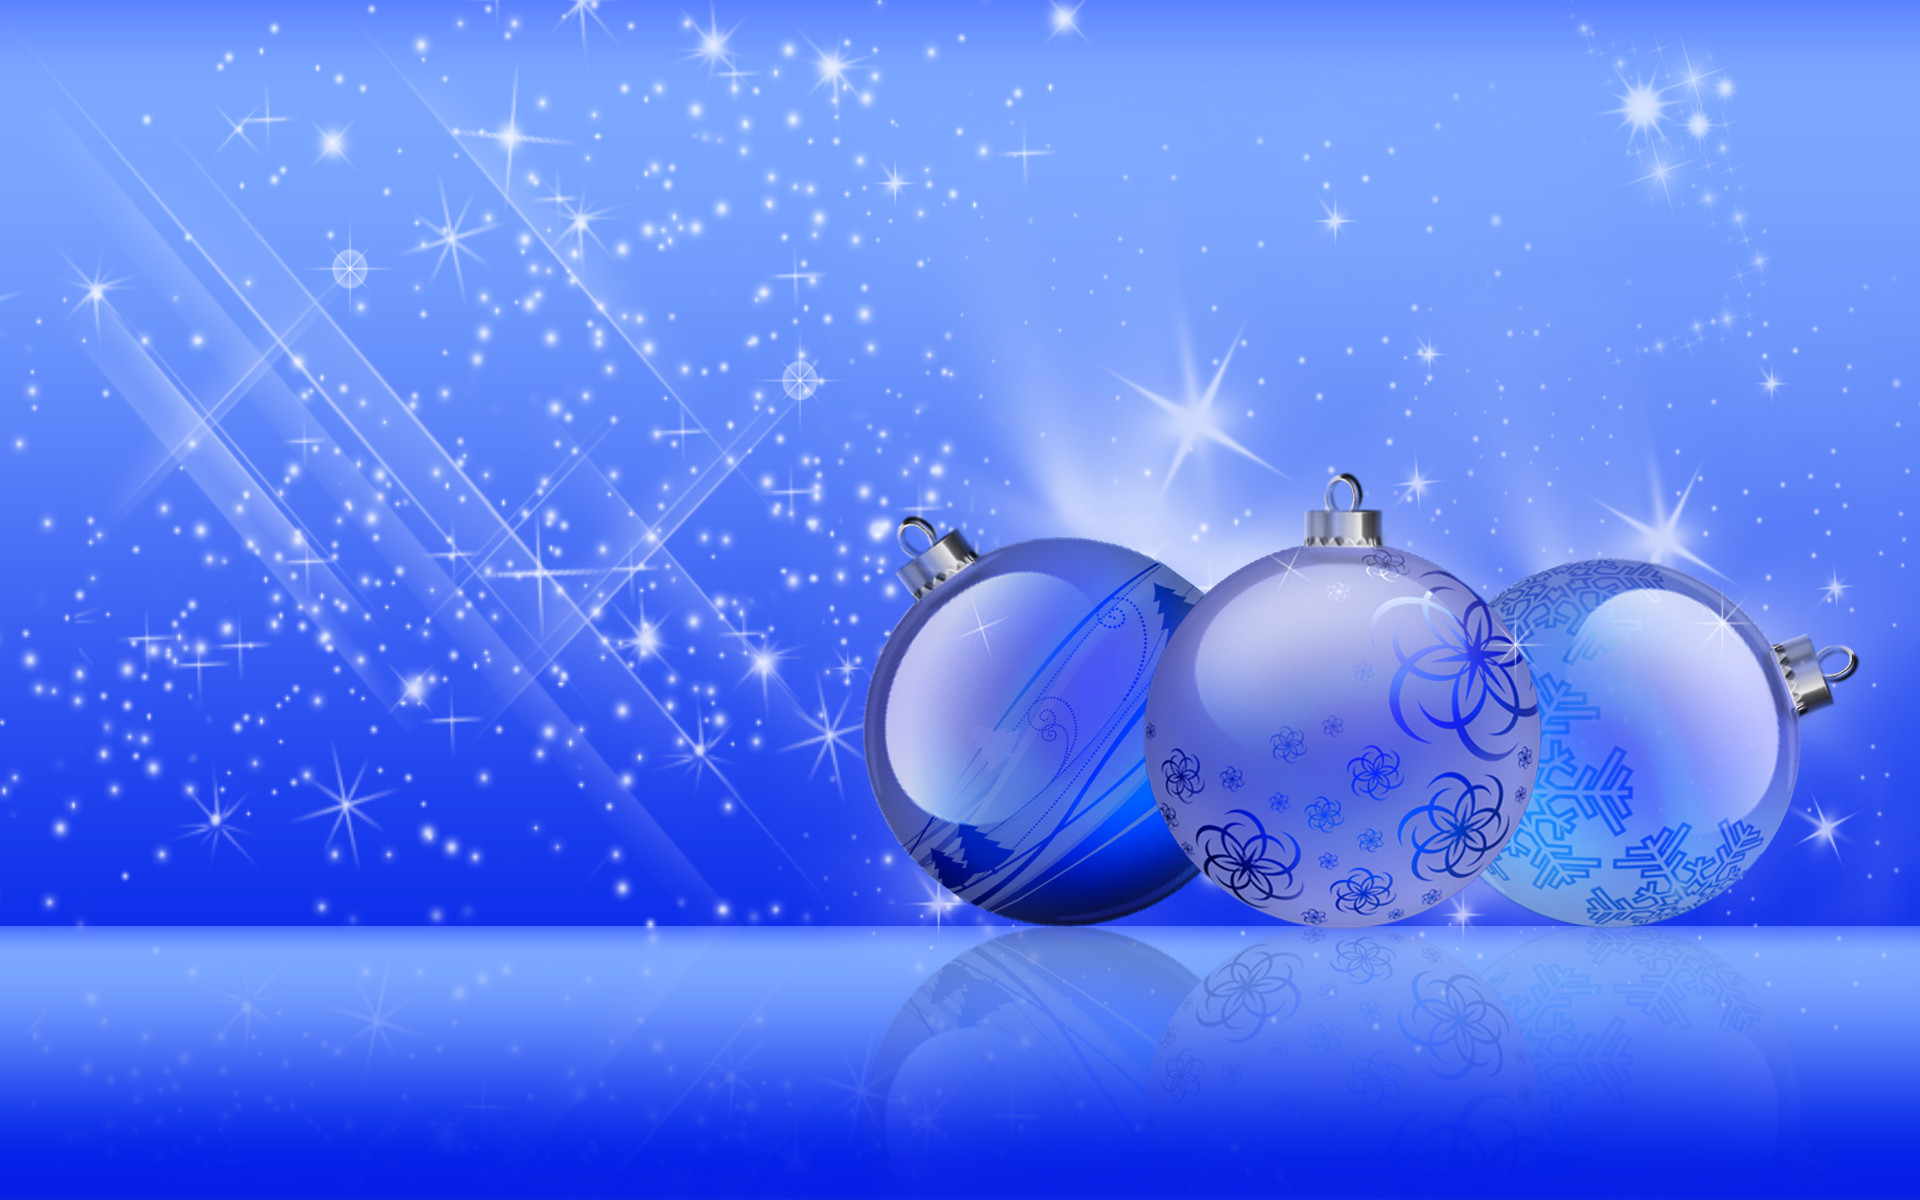 1920x1200 Free Xmas Picture Download.